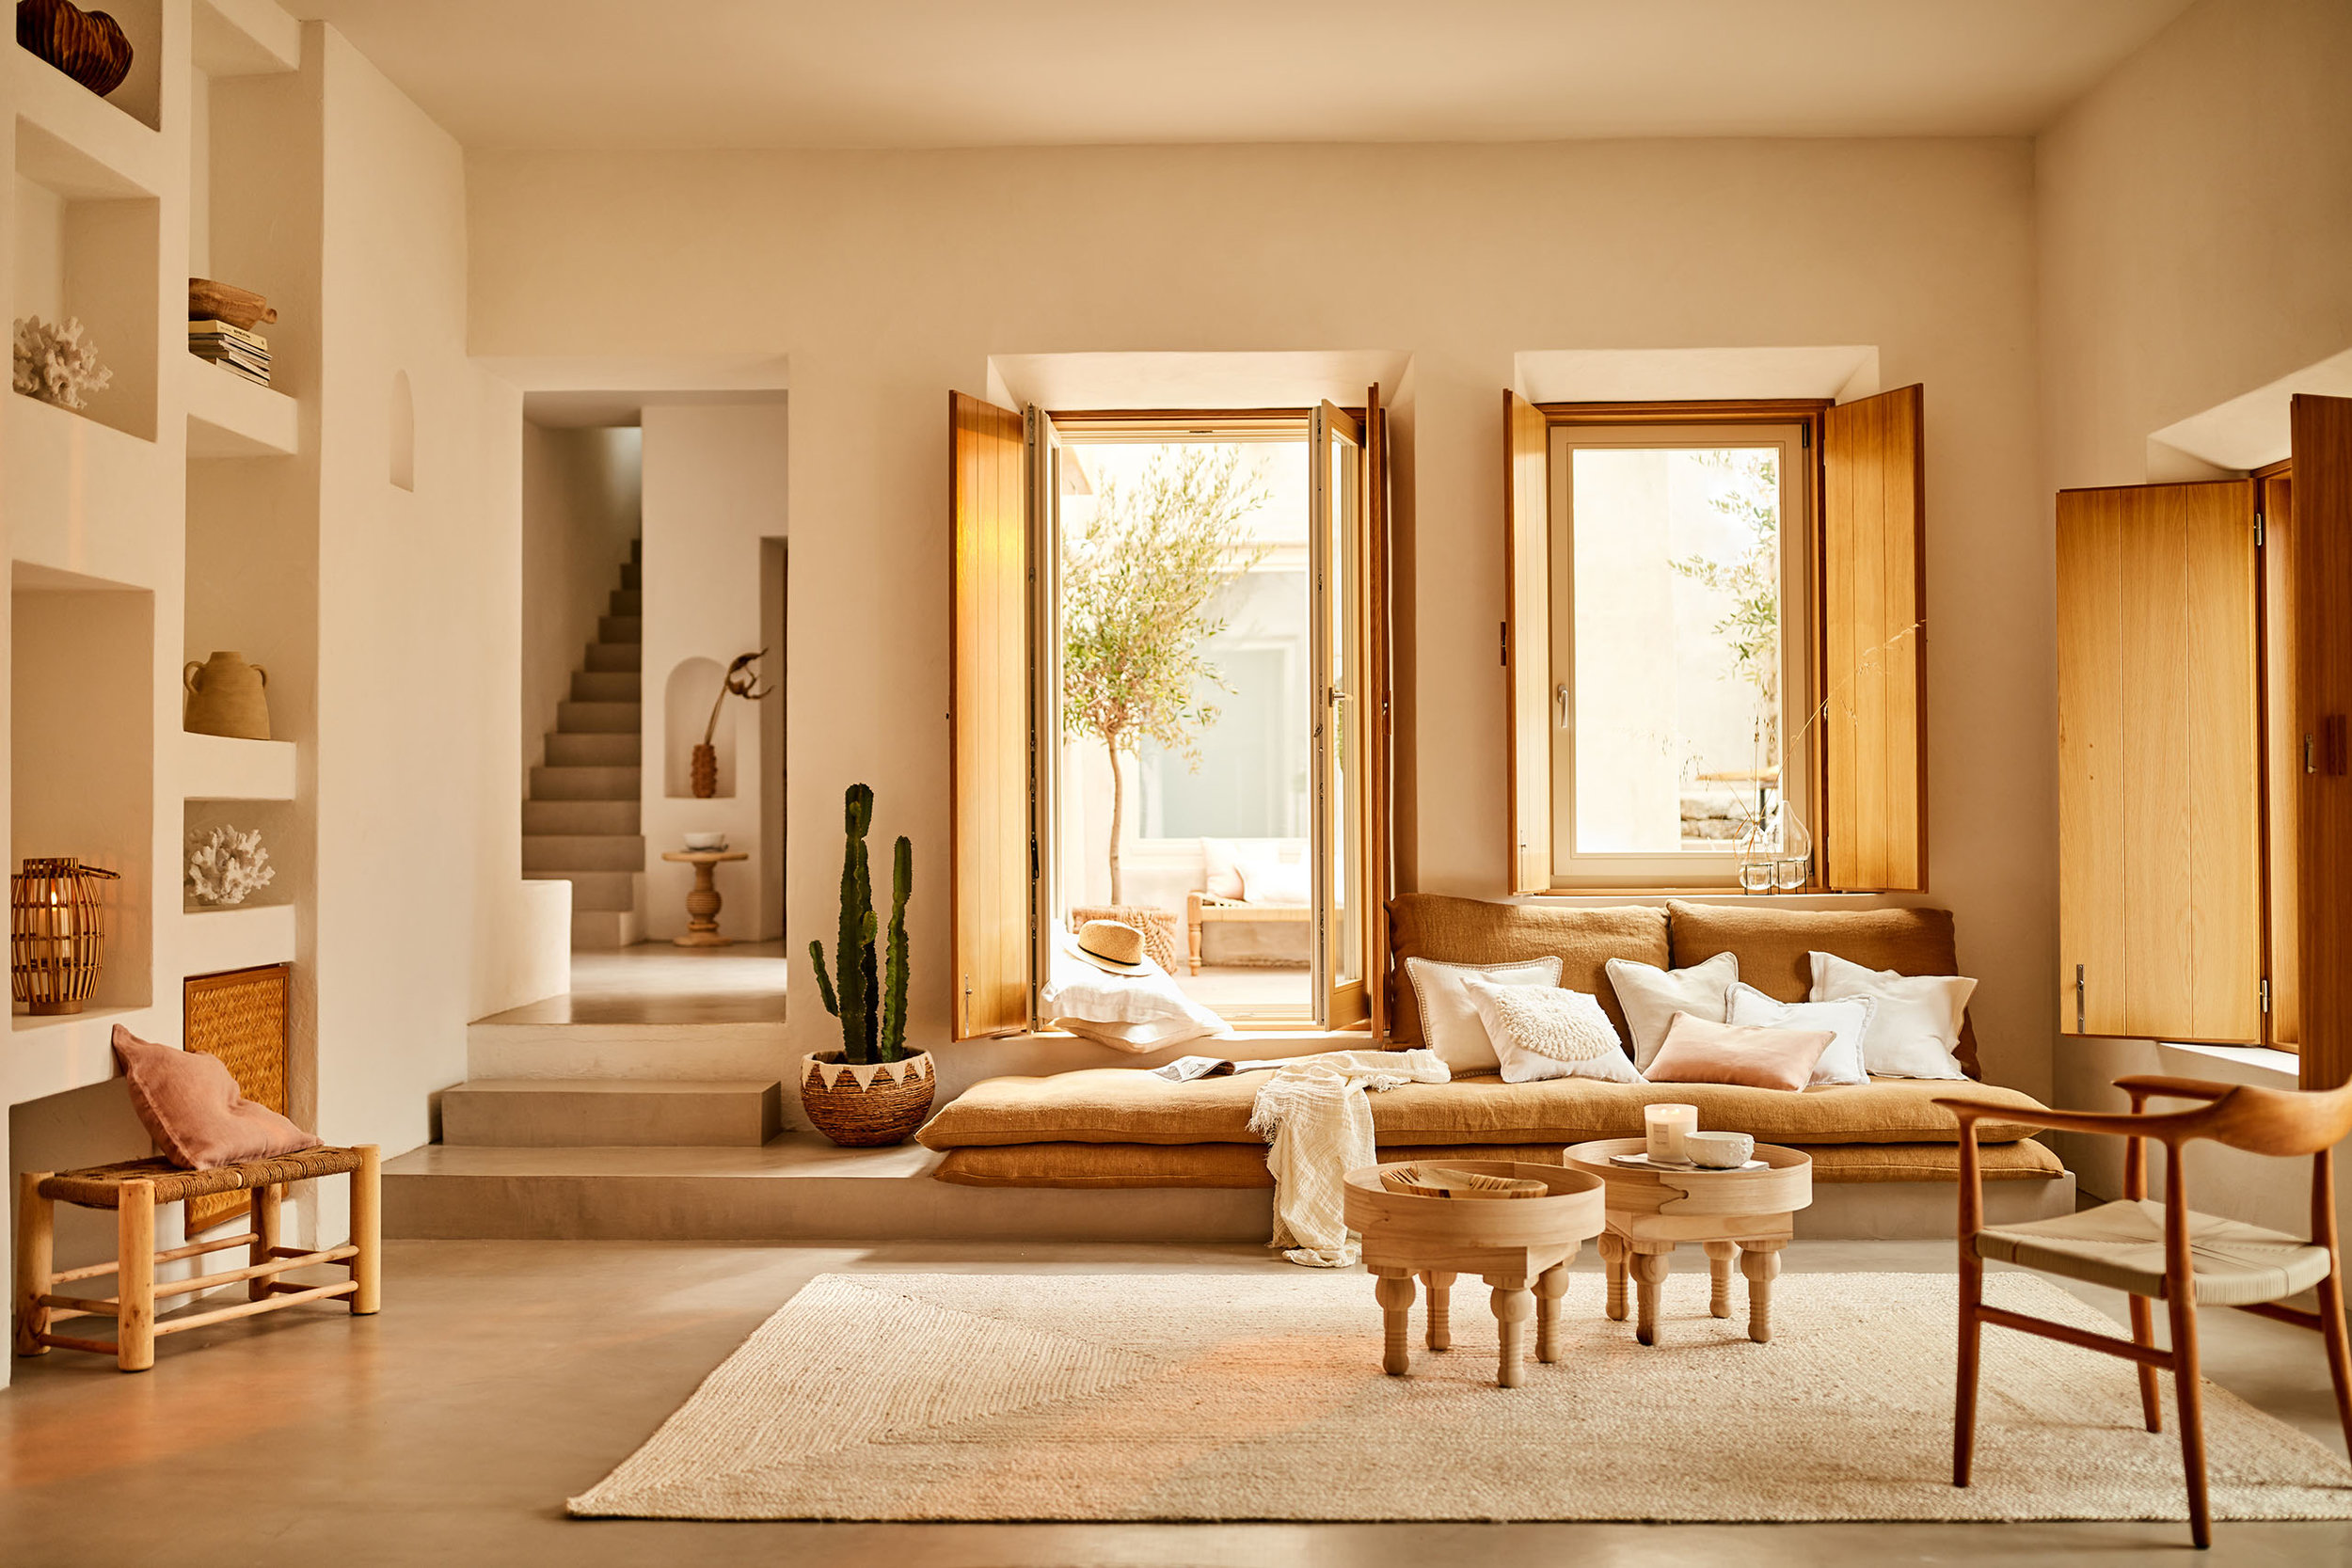 A Greek Villa Decorated In Warm Natural Tones By Zara Home